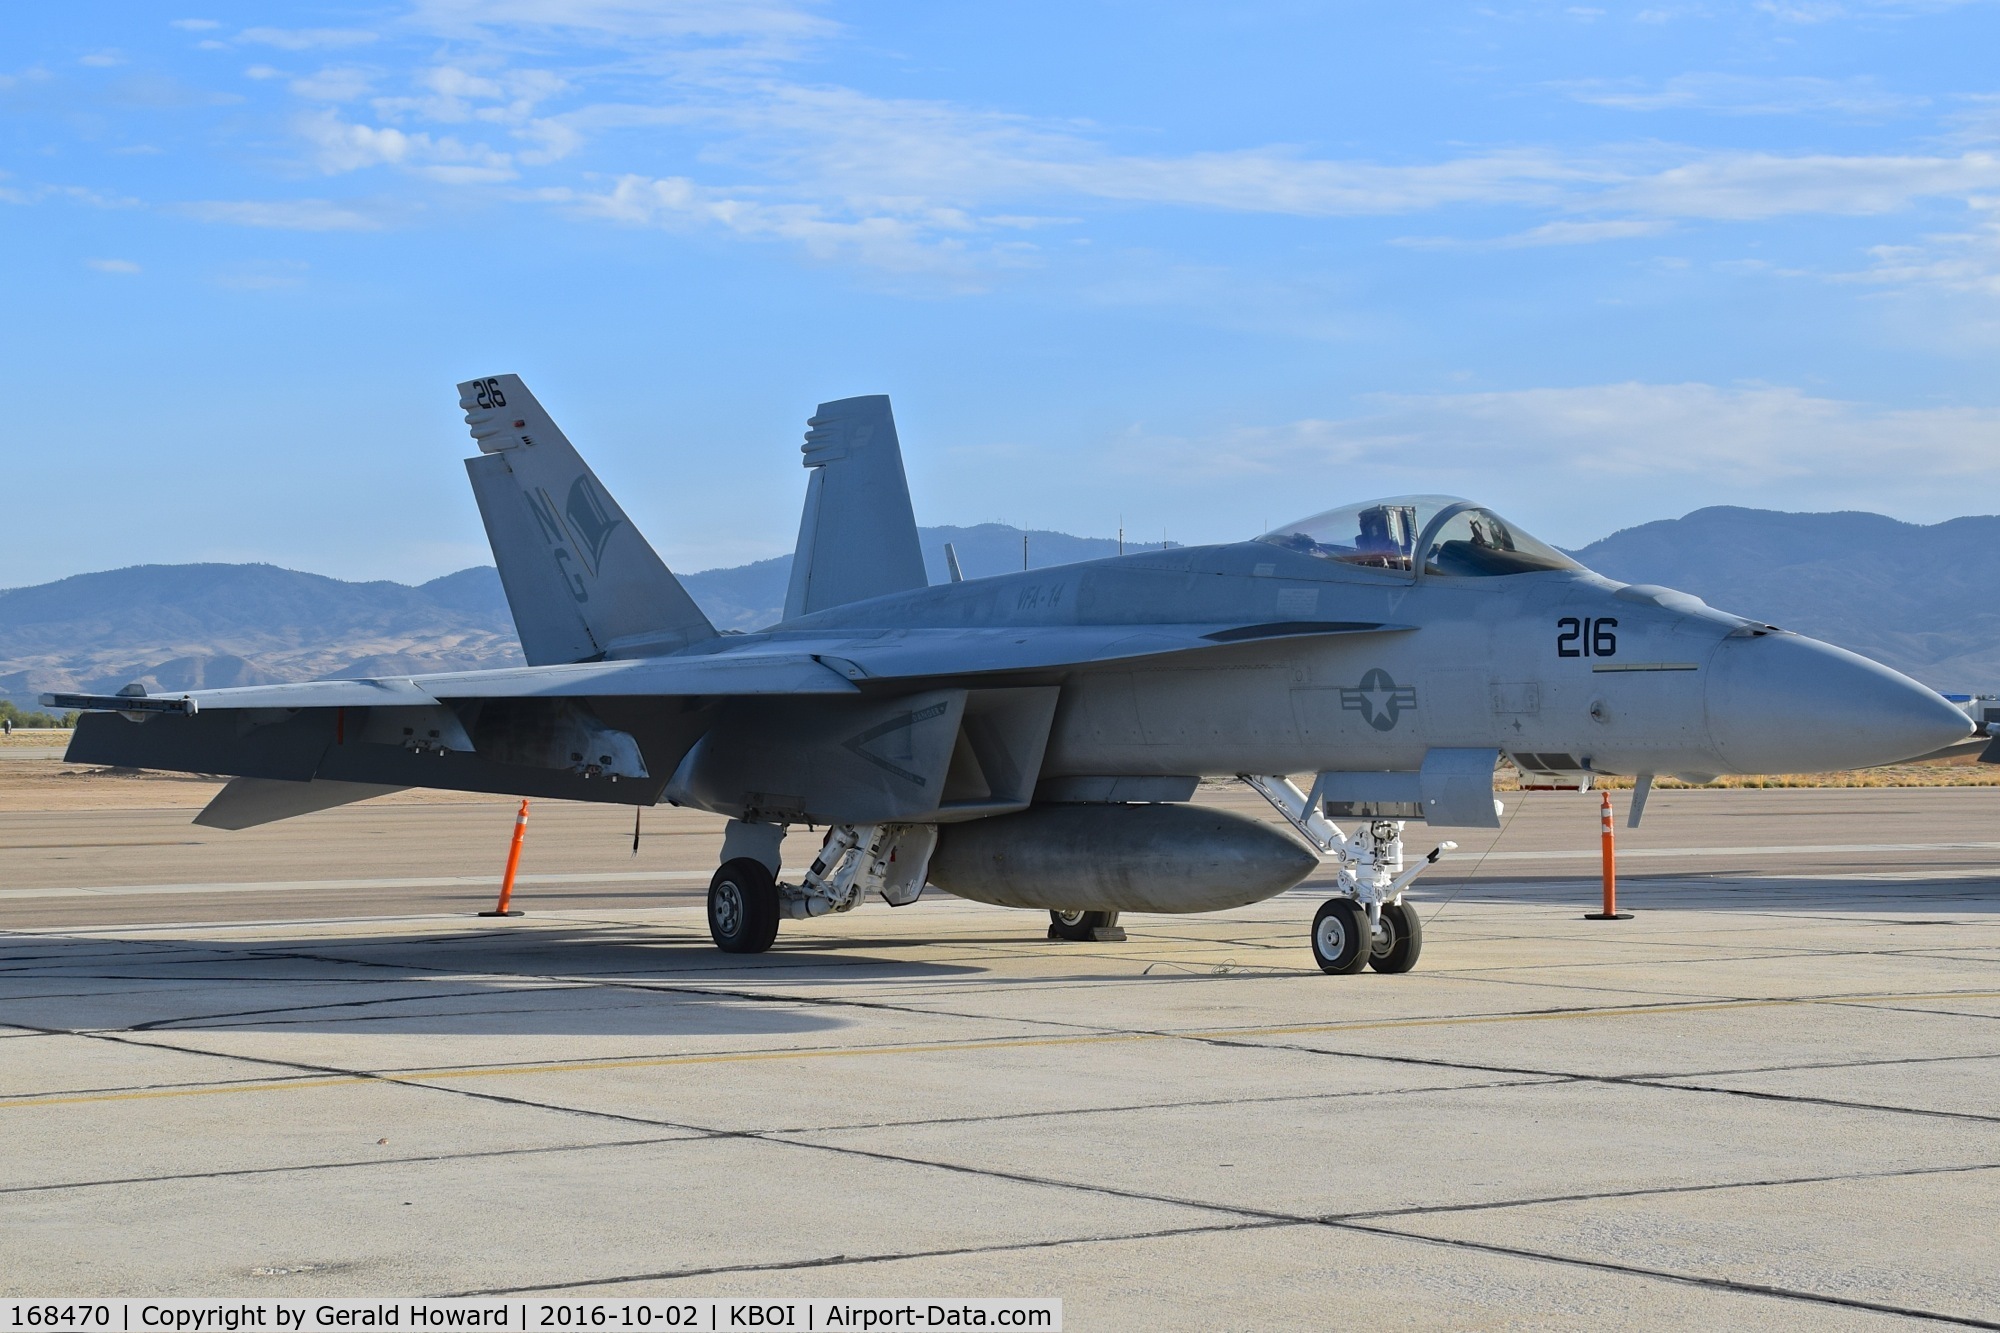 168470, Boeing F/A-18E Super Hornet C/N E-227, Parked on south GA ramp.  VFA-14 “Tophatters”,
Carrier Air Wing 9, NAS Lemoore, CA